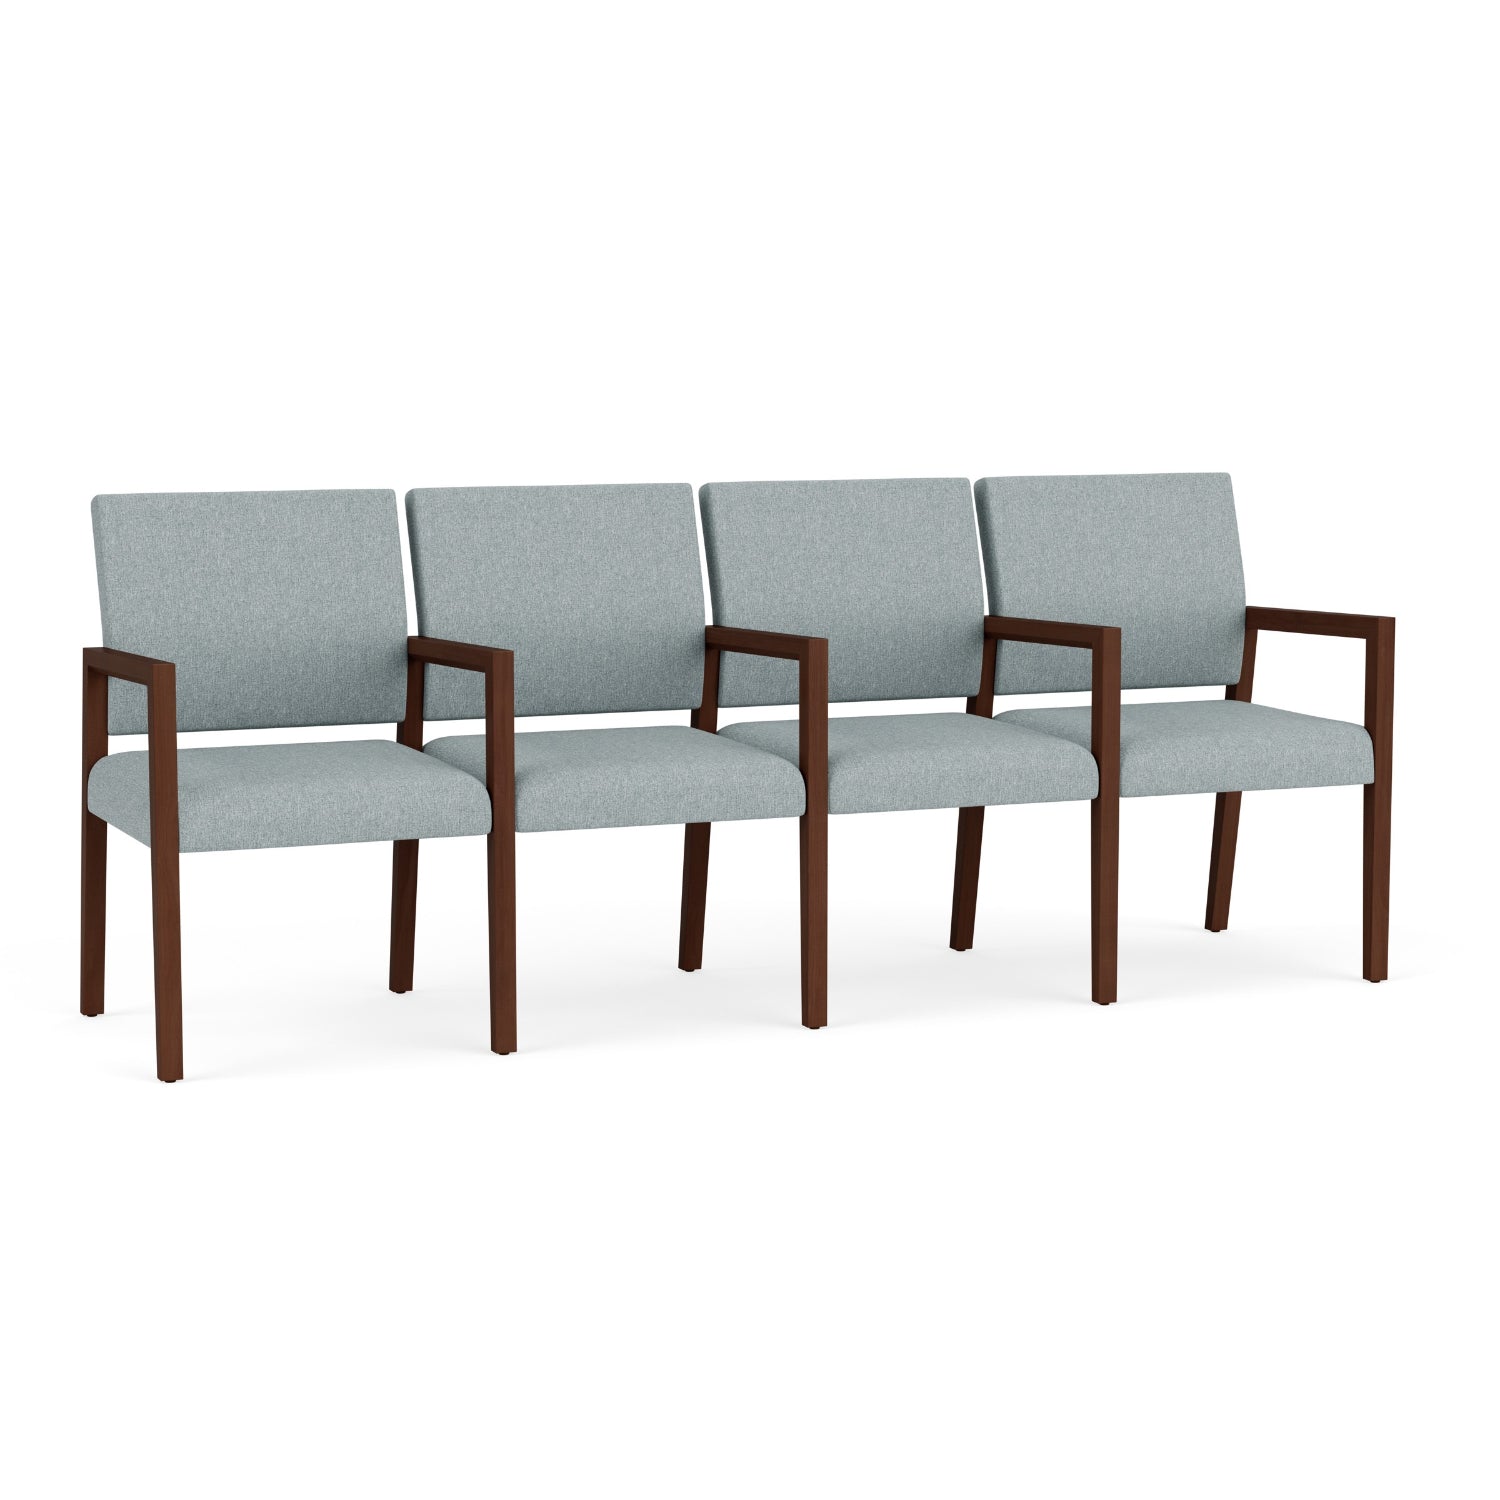 Brooklyn Collection Reception Seating, 4 Seats with Center Arms, Healthcare Vinyl Upholstery, FREE SHIPPING